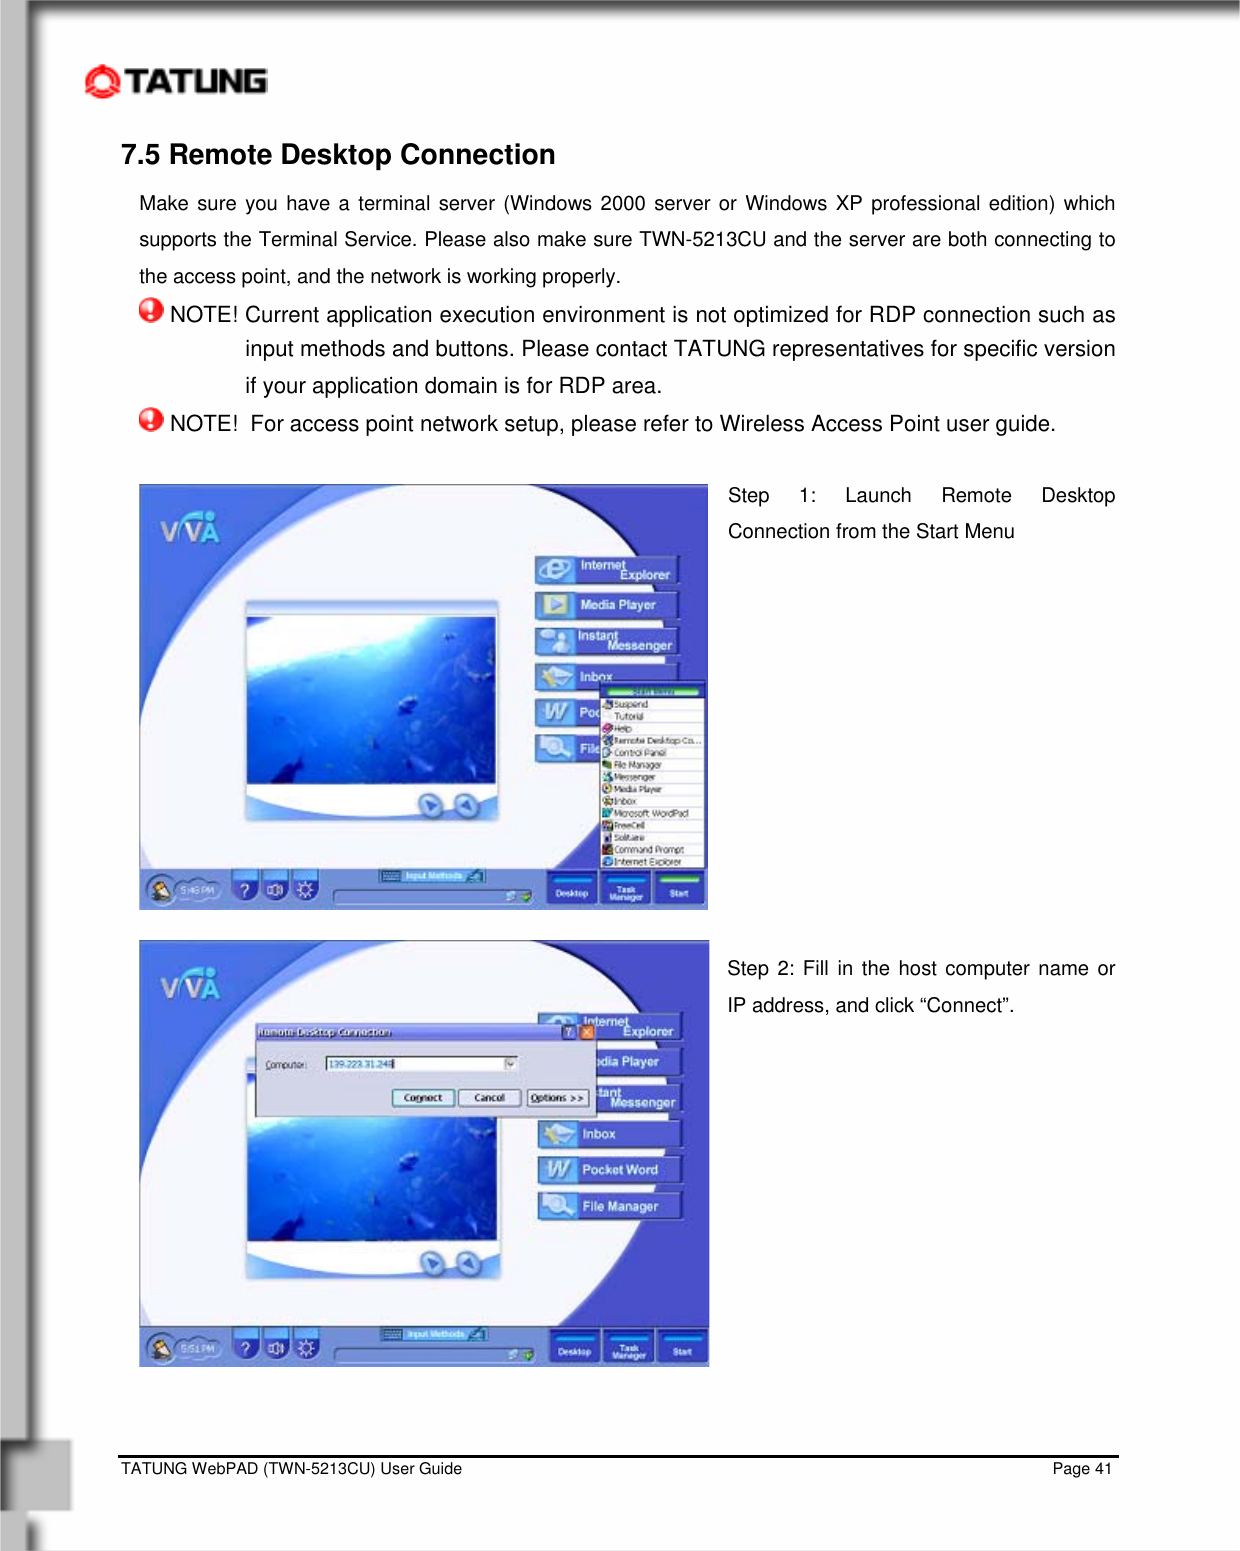    TATUNG WebPAD (TWN-5213CU) User Guide                                                                                                                                   Page 41 7.5 Remote Desktop Connection Make sure you have a terminal server (Windows 2000 server or Windows XP professional edition) which supports the Terminal Service. Please also make sure TWN-5213CU and the server are both connecting to the access point, and the network is working properly.  NOTE! Current application execution environment is not optimized for RDP connection such as input methods and buttons. Please contact TATUNG representatives for specific version if your application domain is for RDP area.  NOTE!  For access point network setup, please refer to Wireless Access Point user guide.  Step 1: Launch Remote Desktop Connection from the Start Menu            Step 2: Fill in the host computer name or IP address, and click “Connect”.               